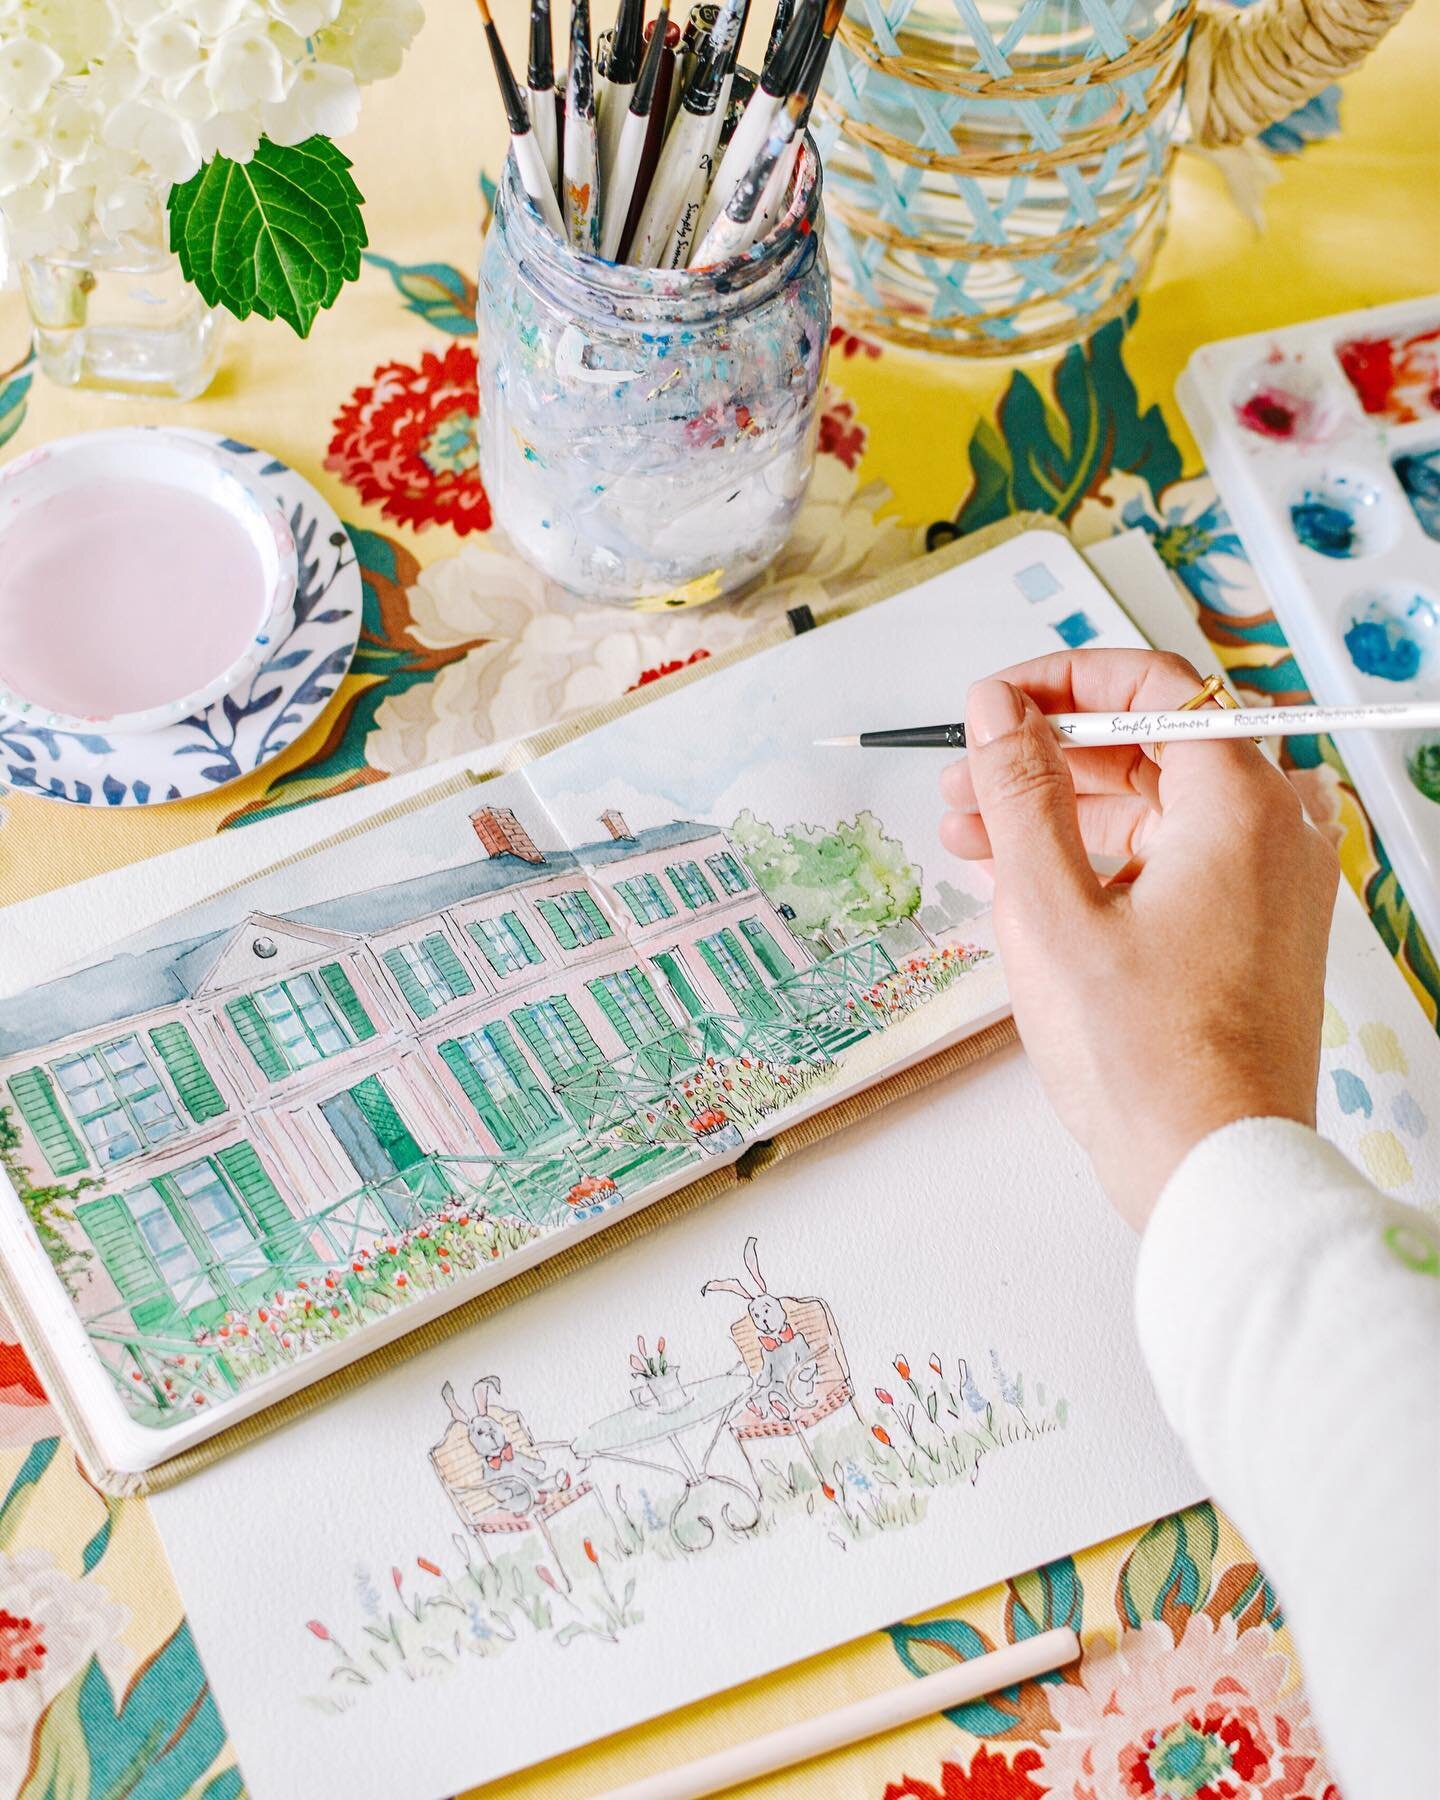 🖌My painting pal, @cestriley, lead us on an incredible {virtual} art journey last night to Claude Monet&rsquo;s home in Giverny through her @brushbecause watercolor workshop! 🌿Getting to see Riley&rsquo;s process over @zoom was such a special exper